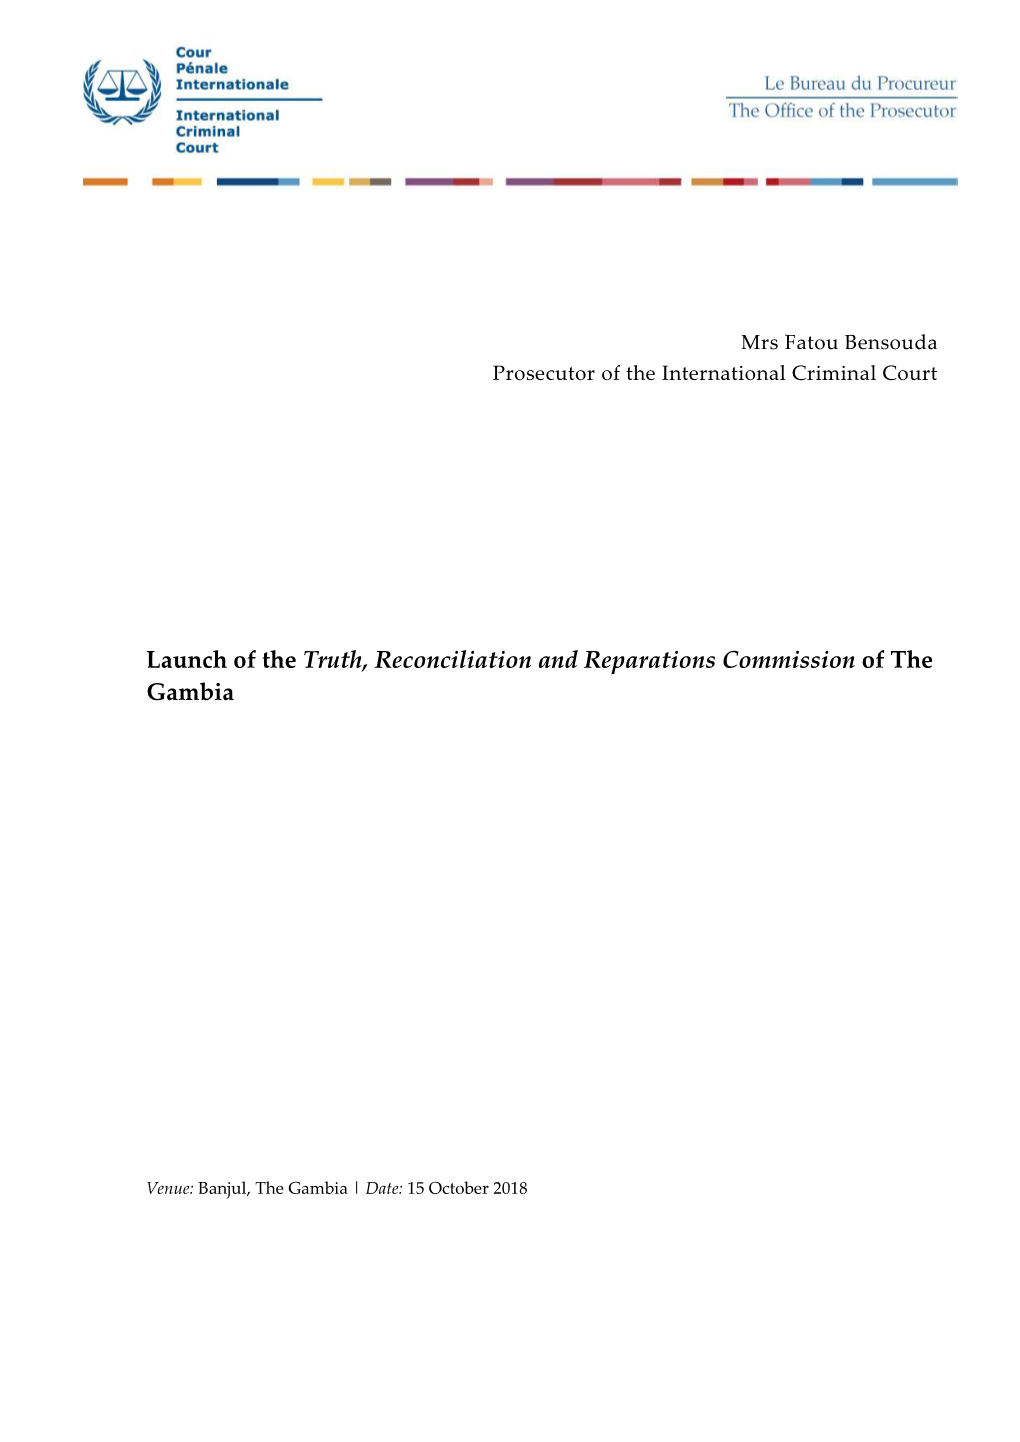 Launch of the Truth, Reconciliation and Reparations Commission of the Gambia